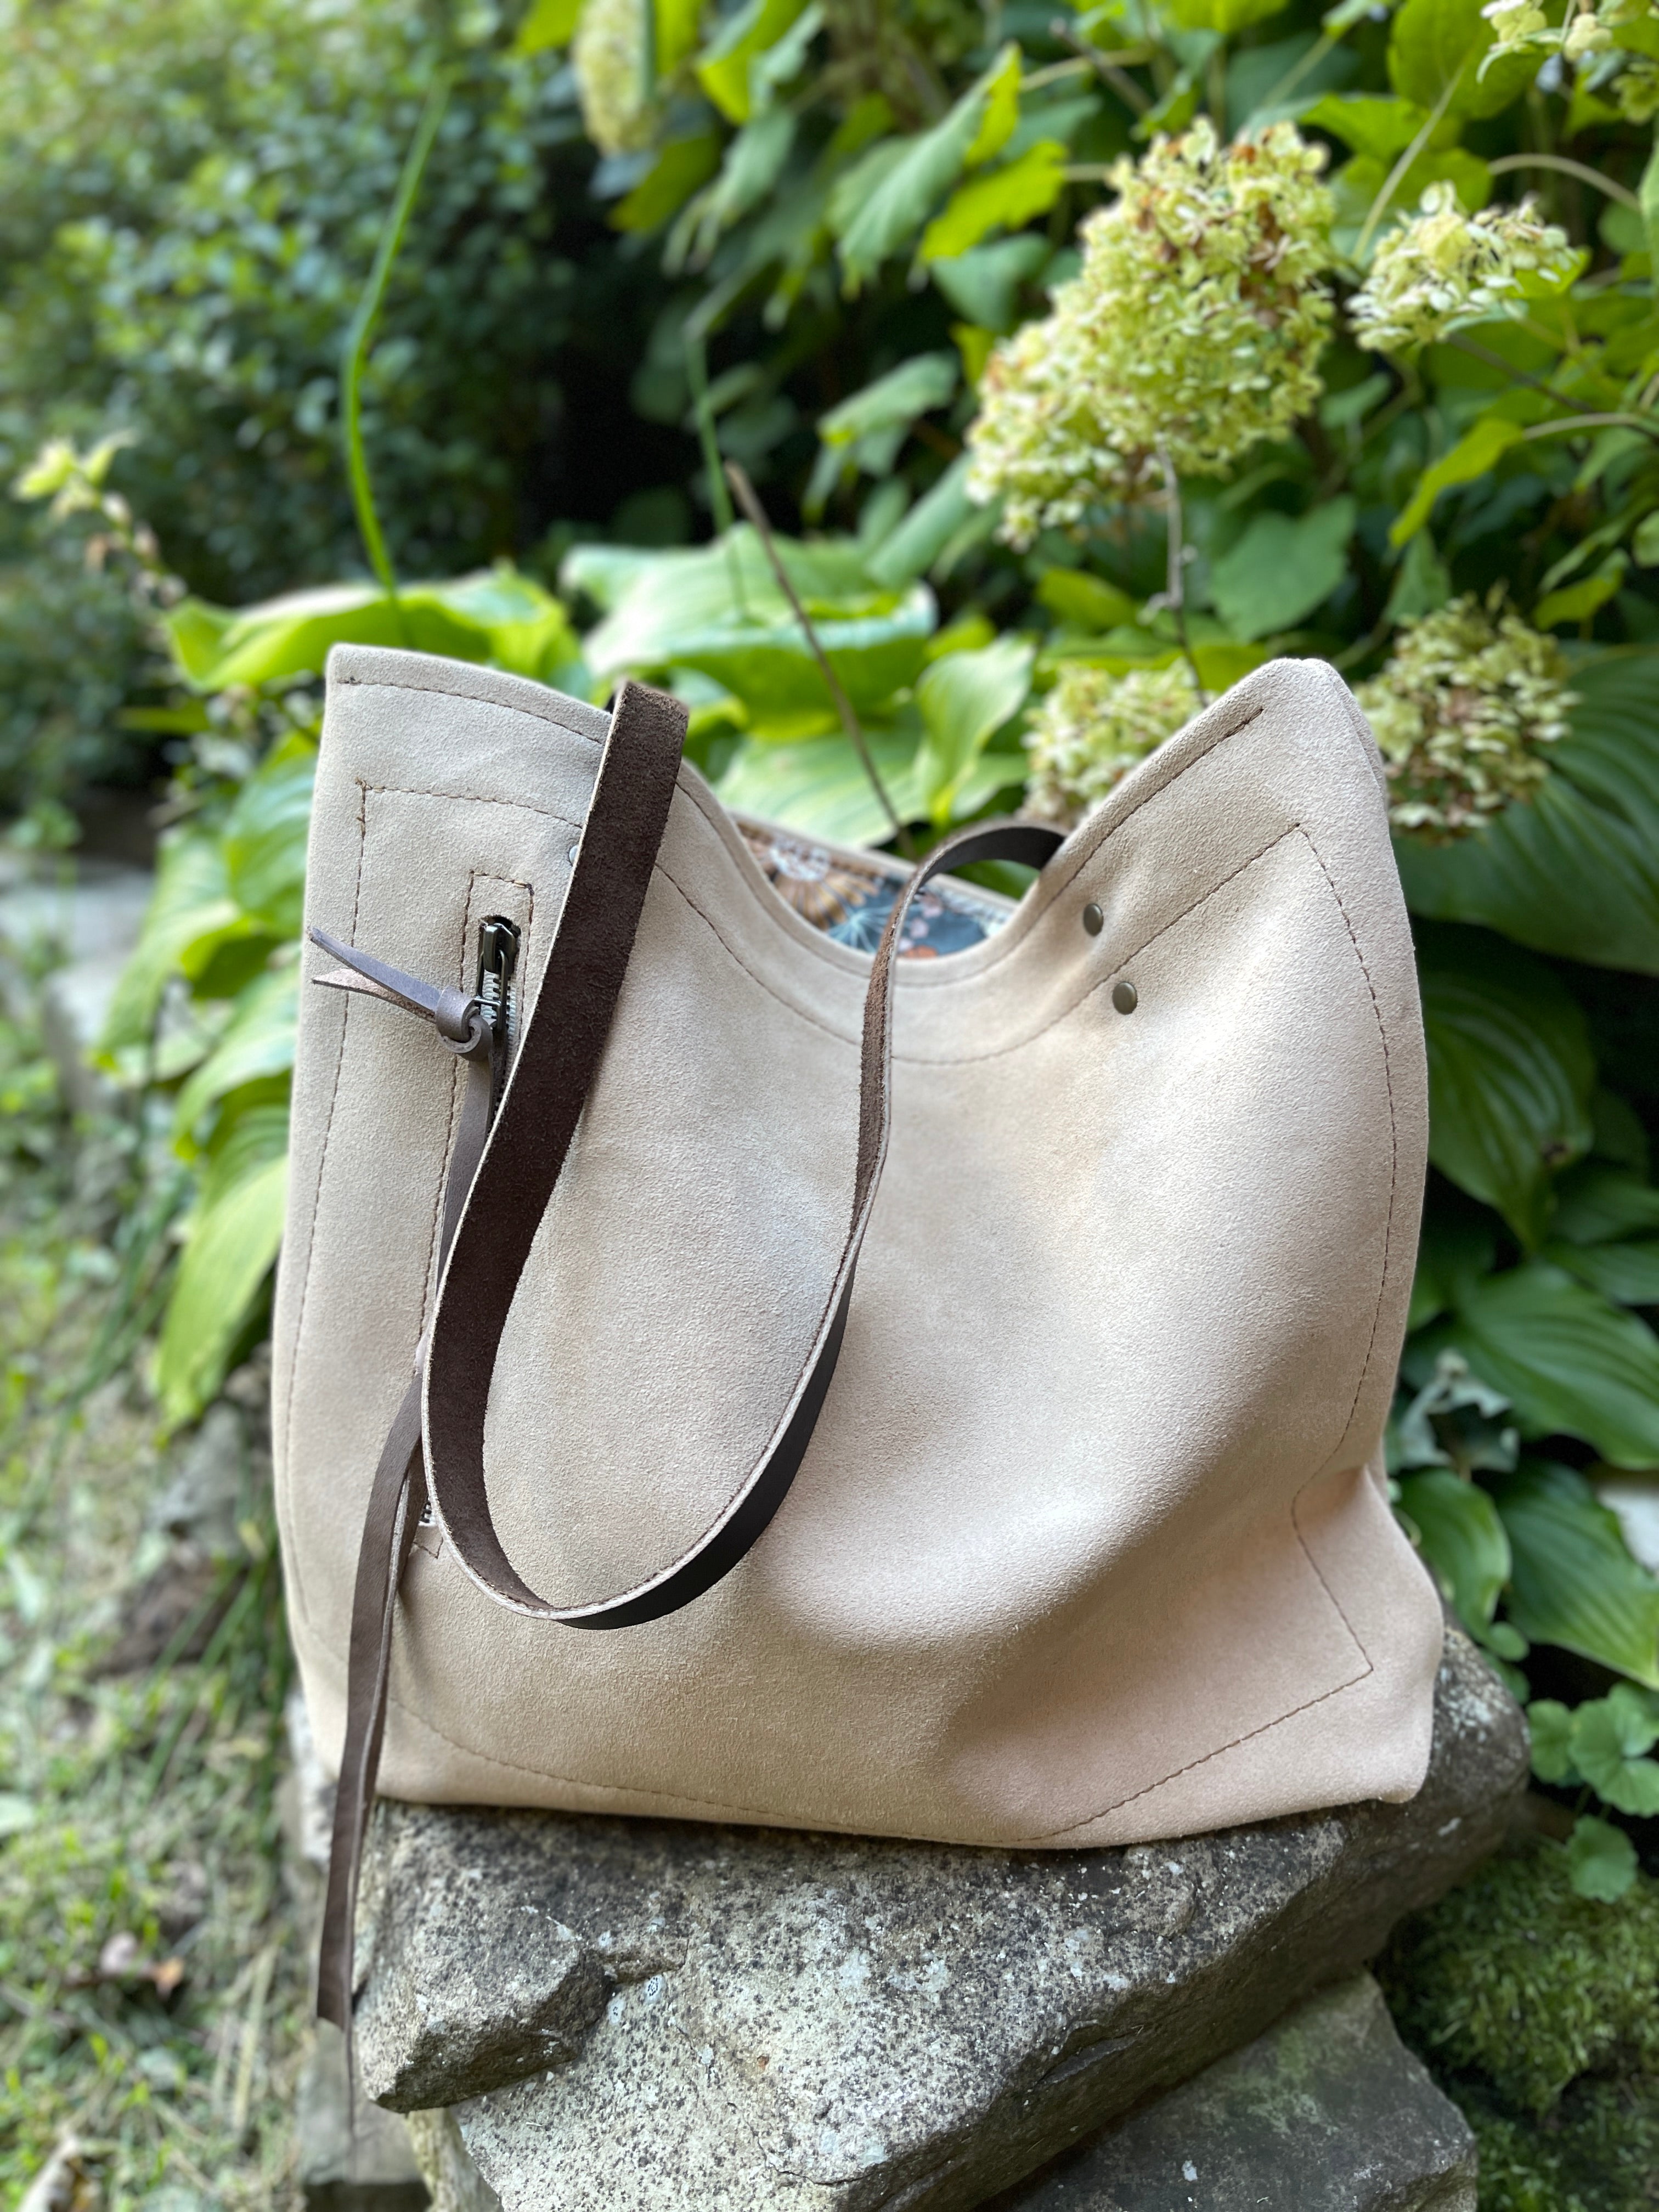 Buttery Tan Suede Shoulder Tote